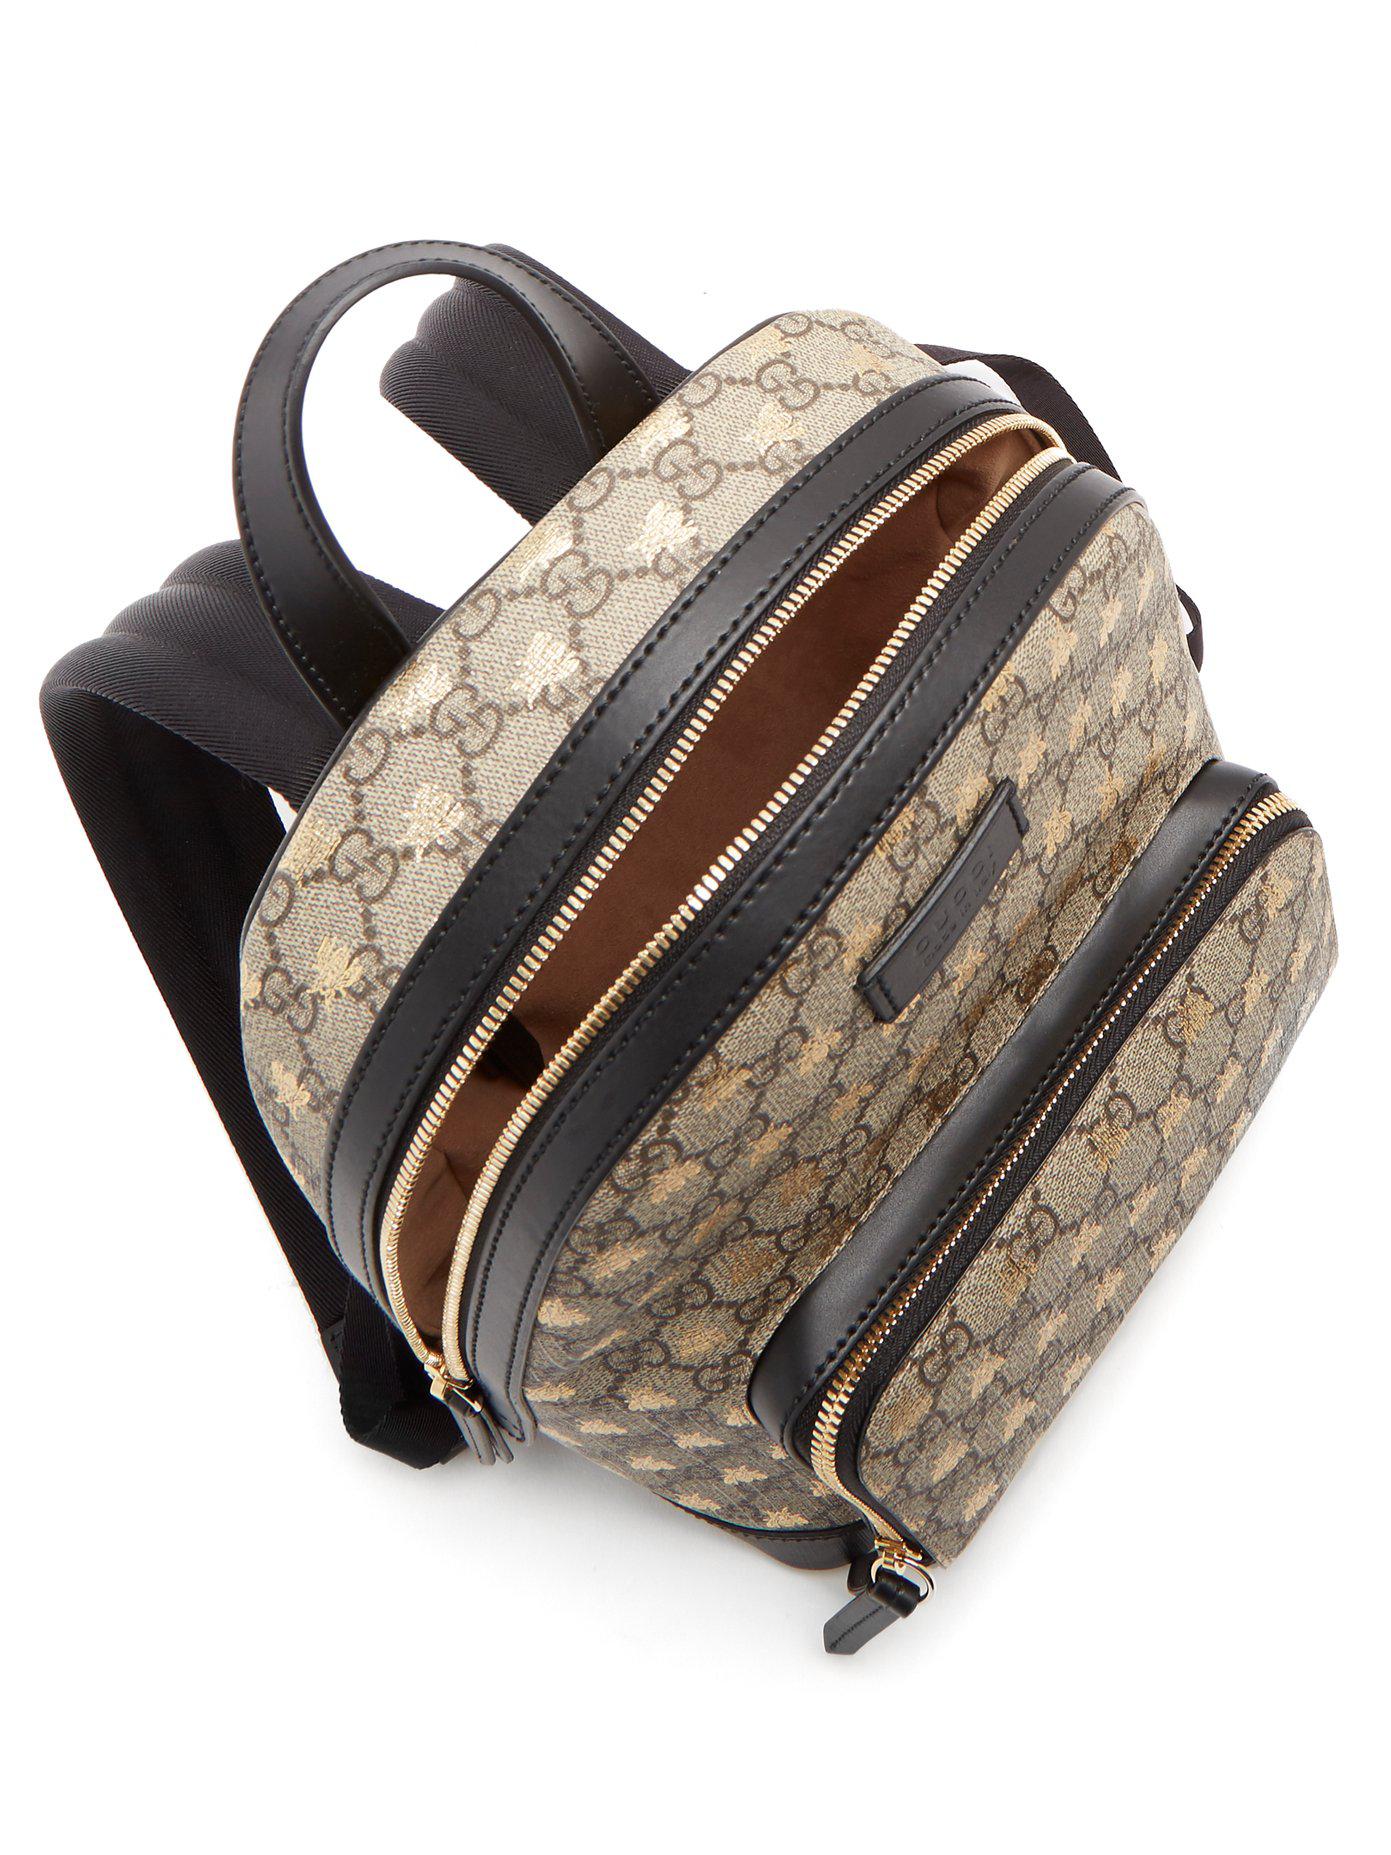 Gucci GG Supreme Backpack with Web Stripe 442722 – Queen Bee of